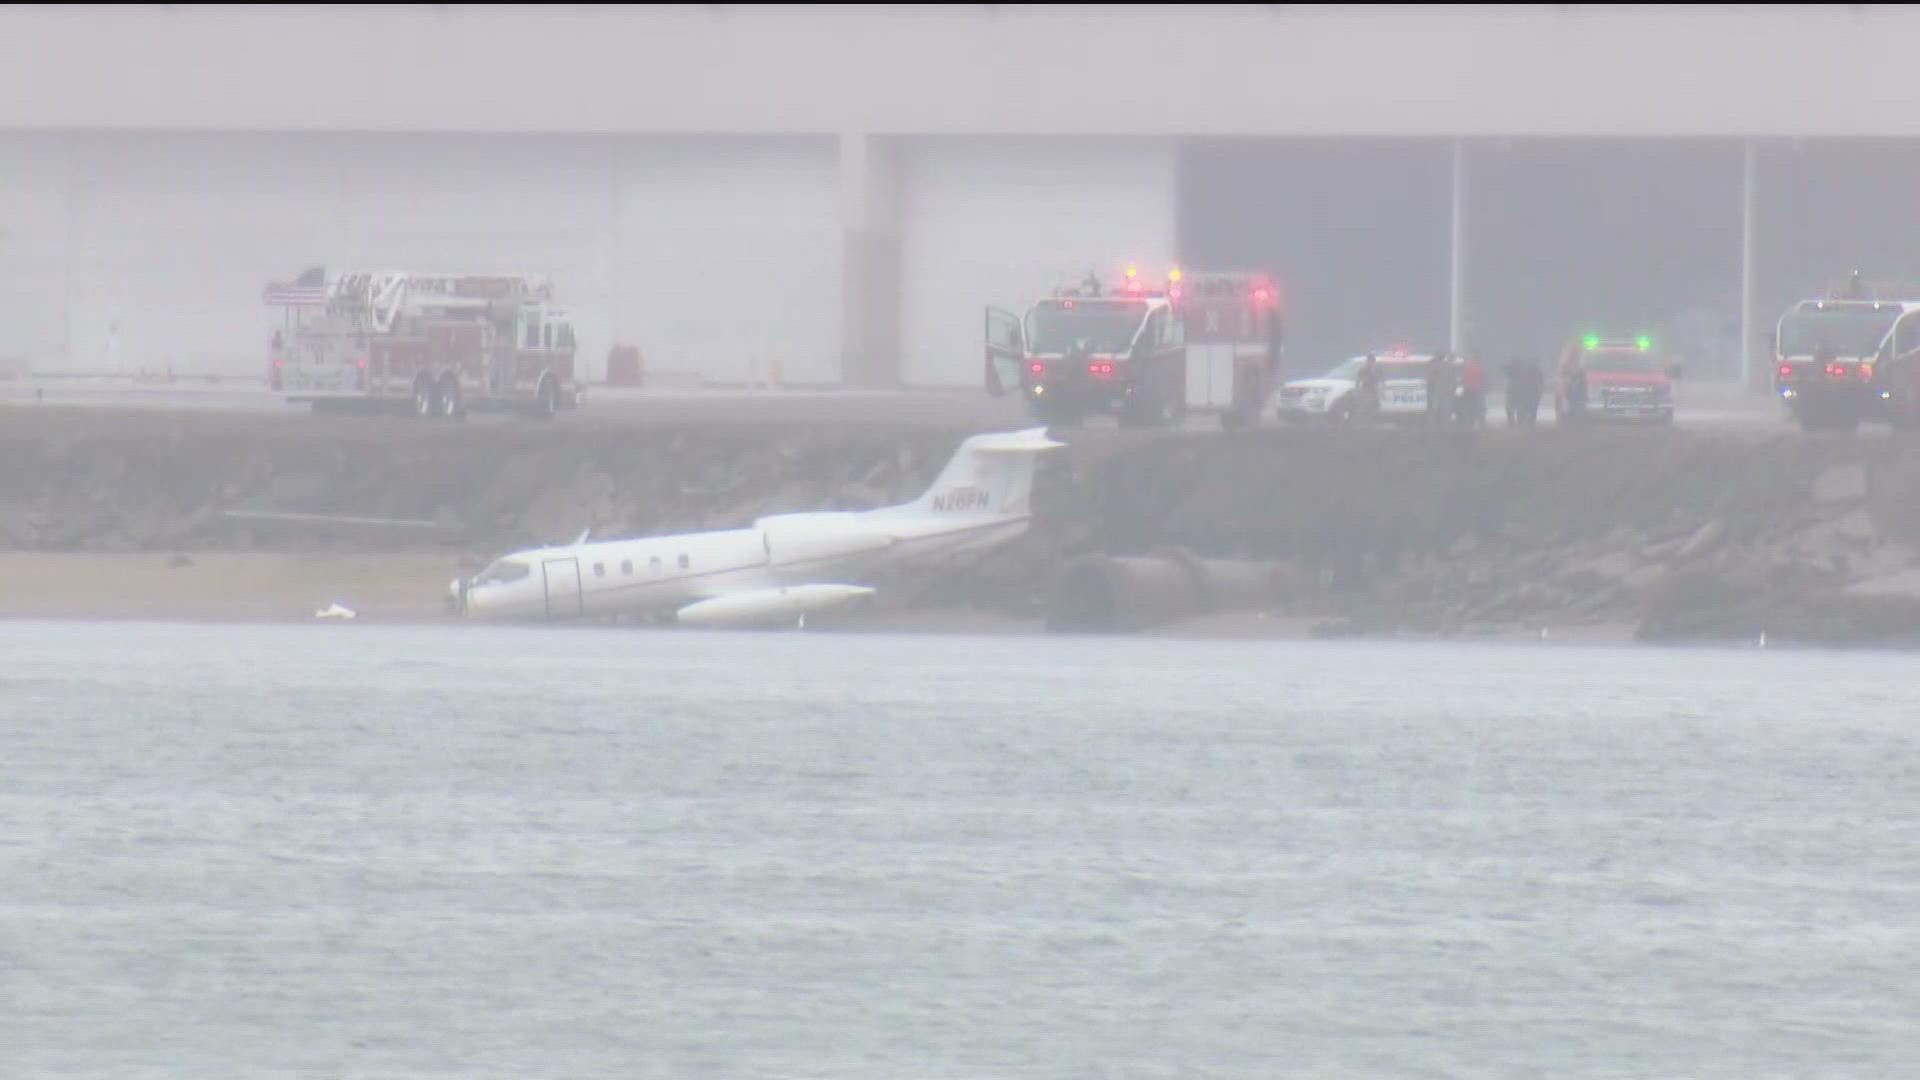 The Navy confirmed that there were 2 people on board the plane and that there were no serious injuries reported.